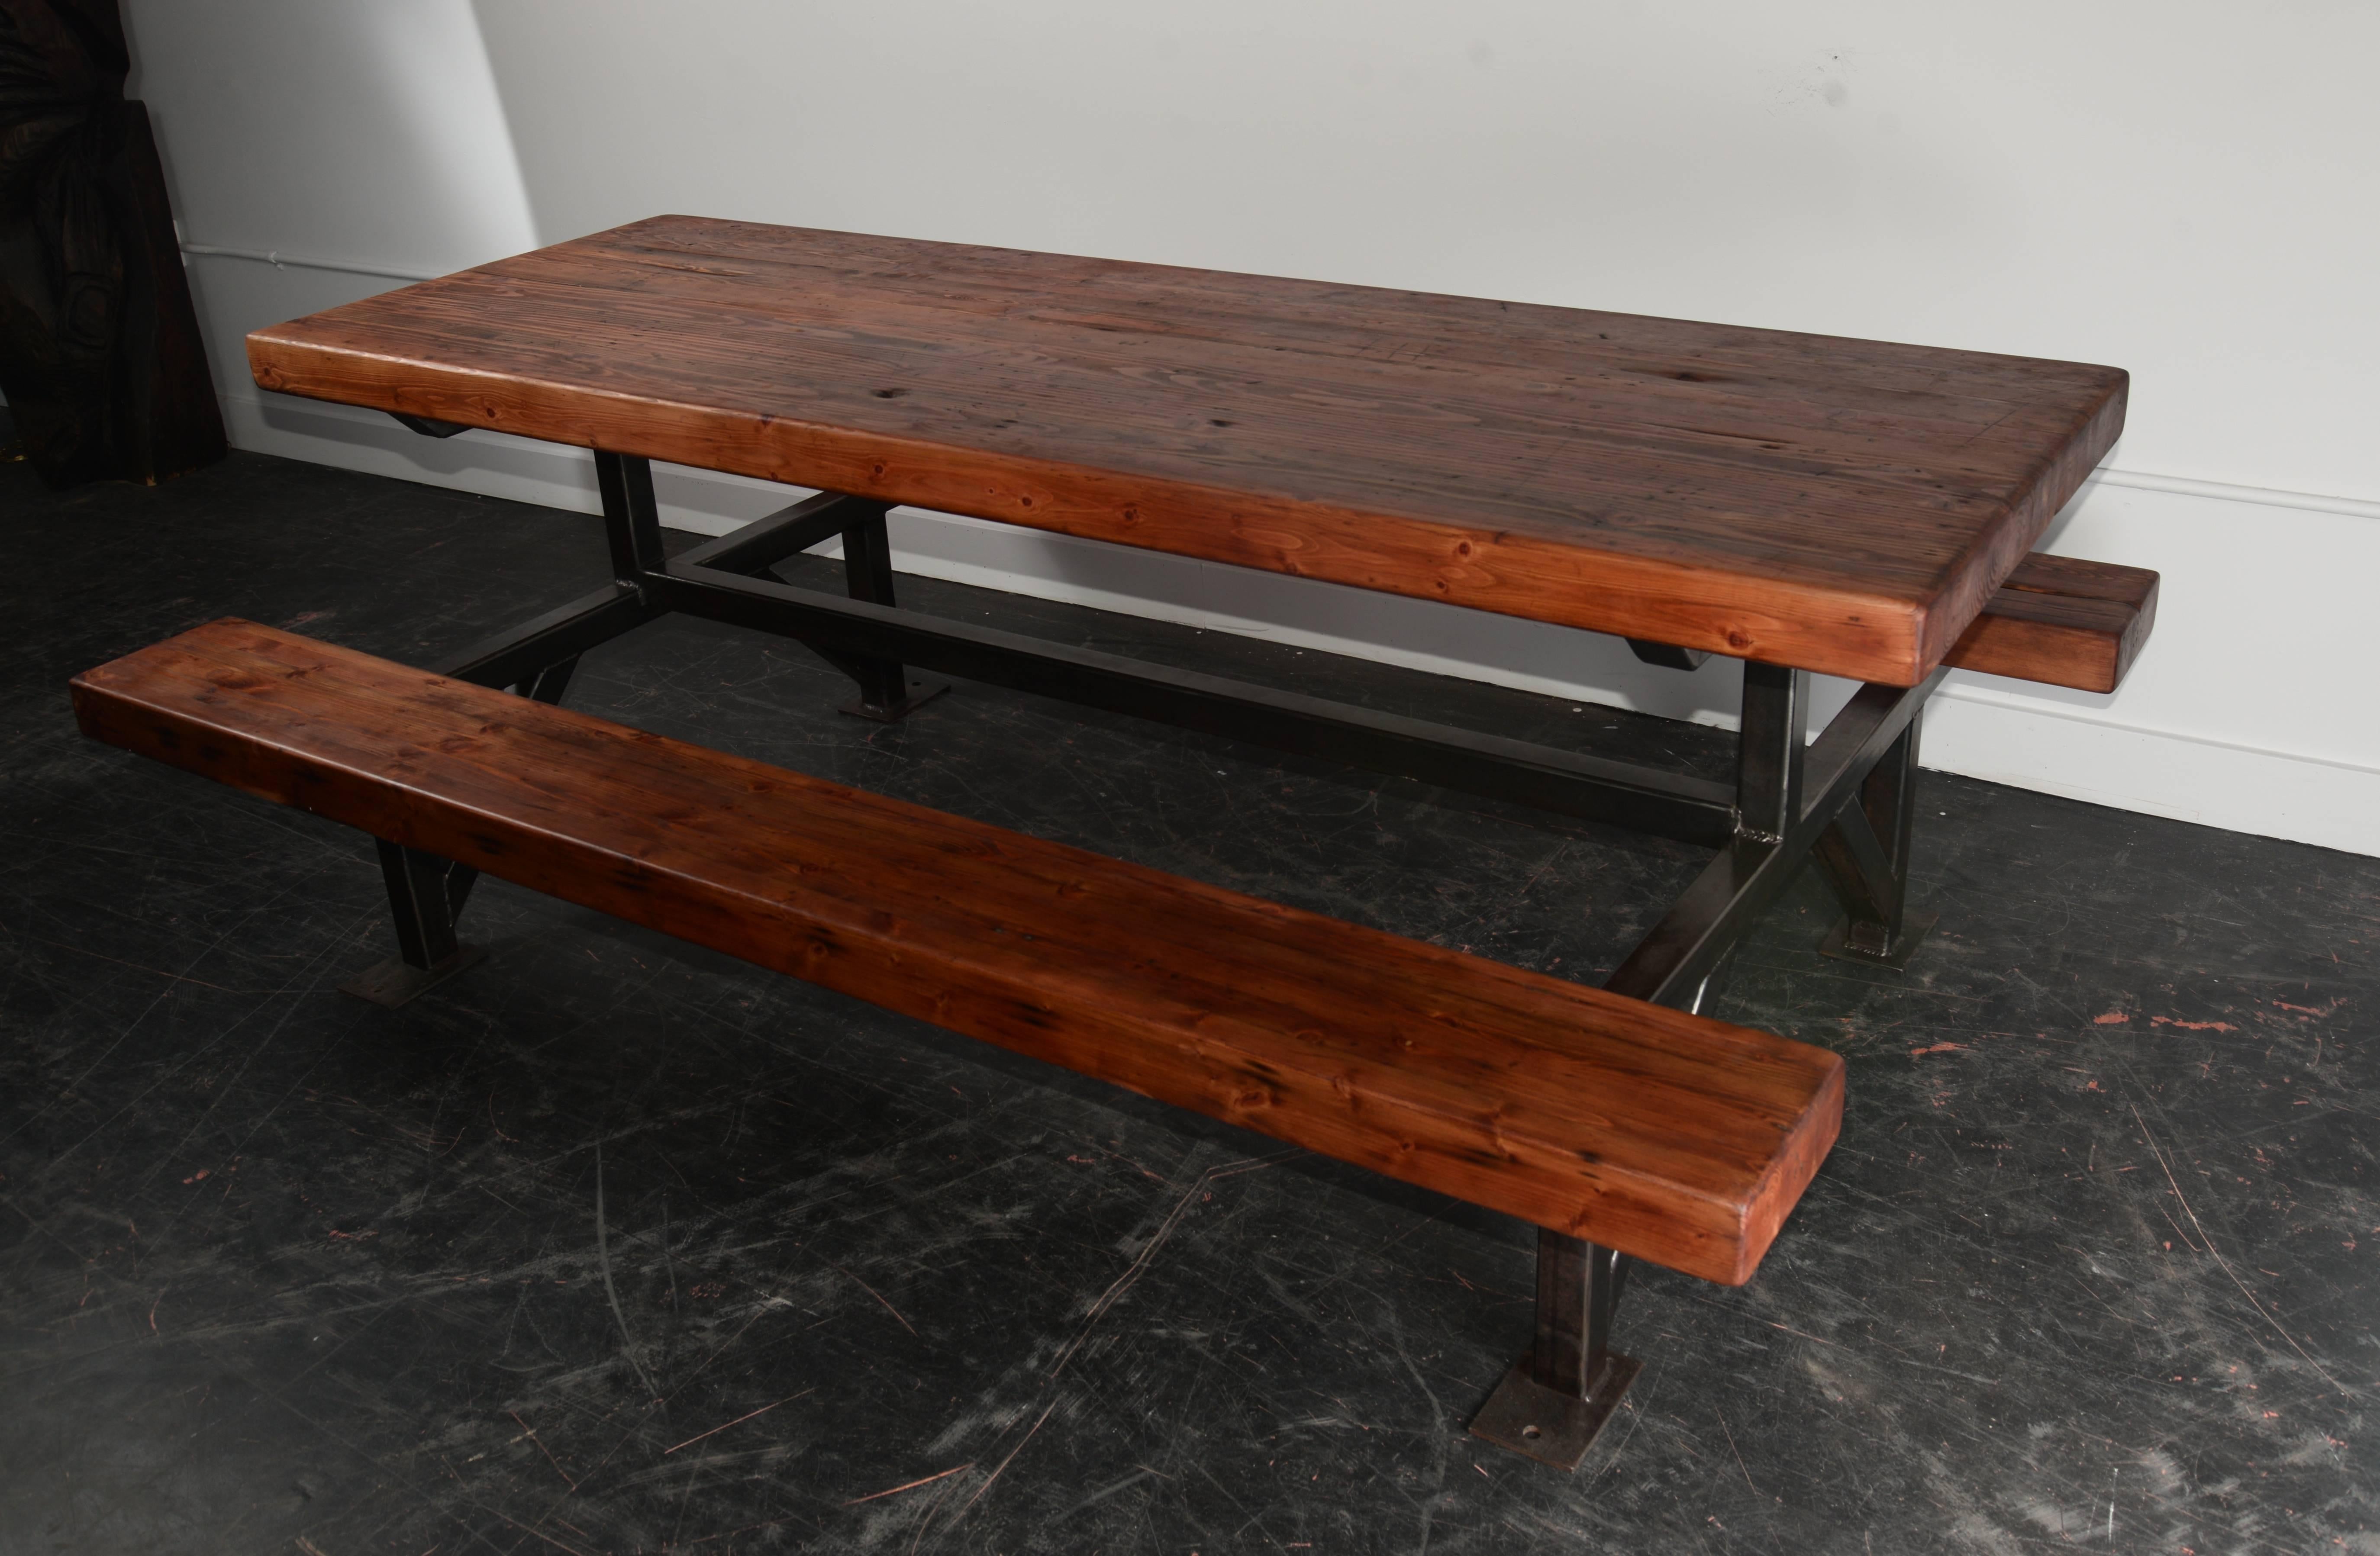 This homemade picnic style table was made in the early 1930s for a break room in an Oregon mill.